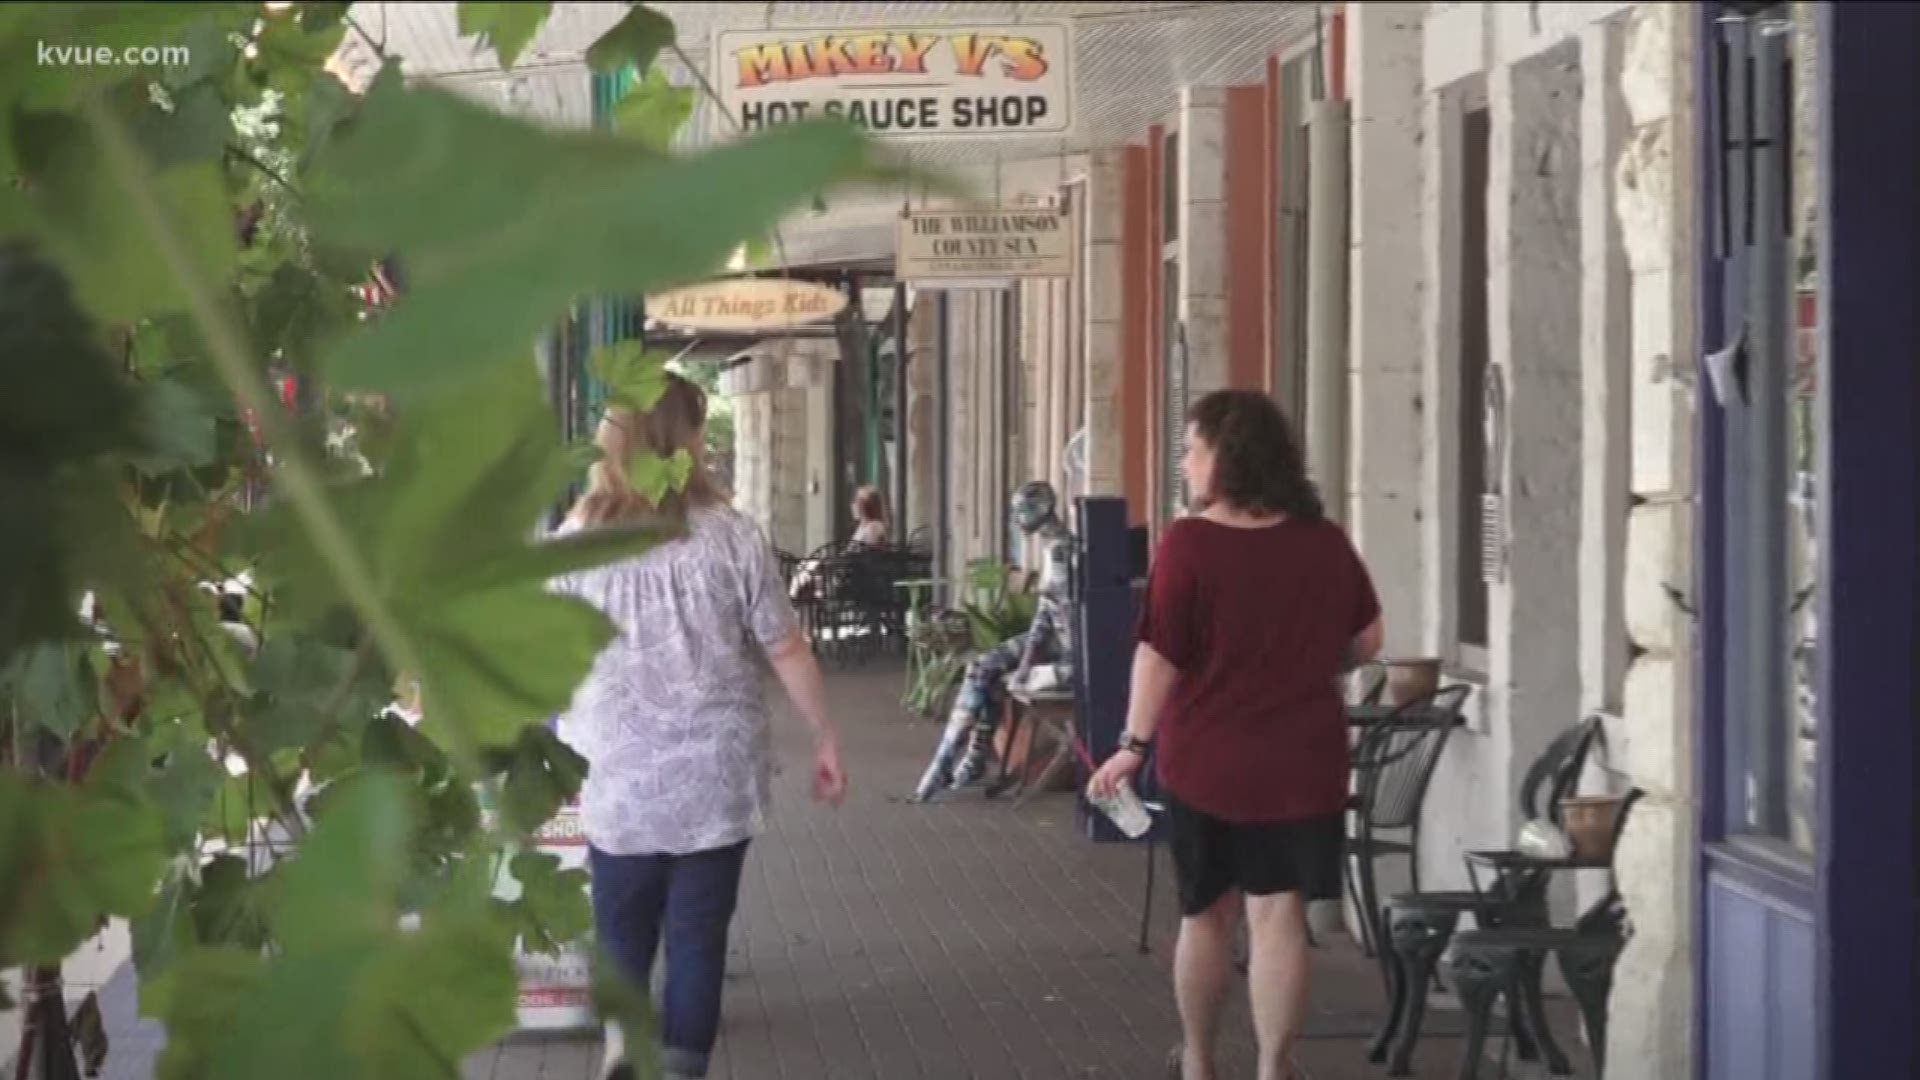 Georgetown is one of the fastest-growing cities in Central Texas.